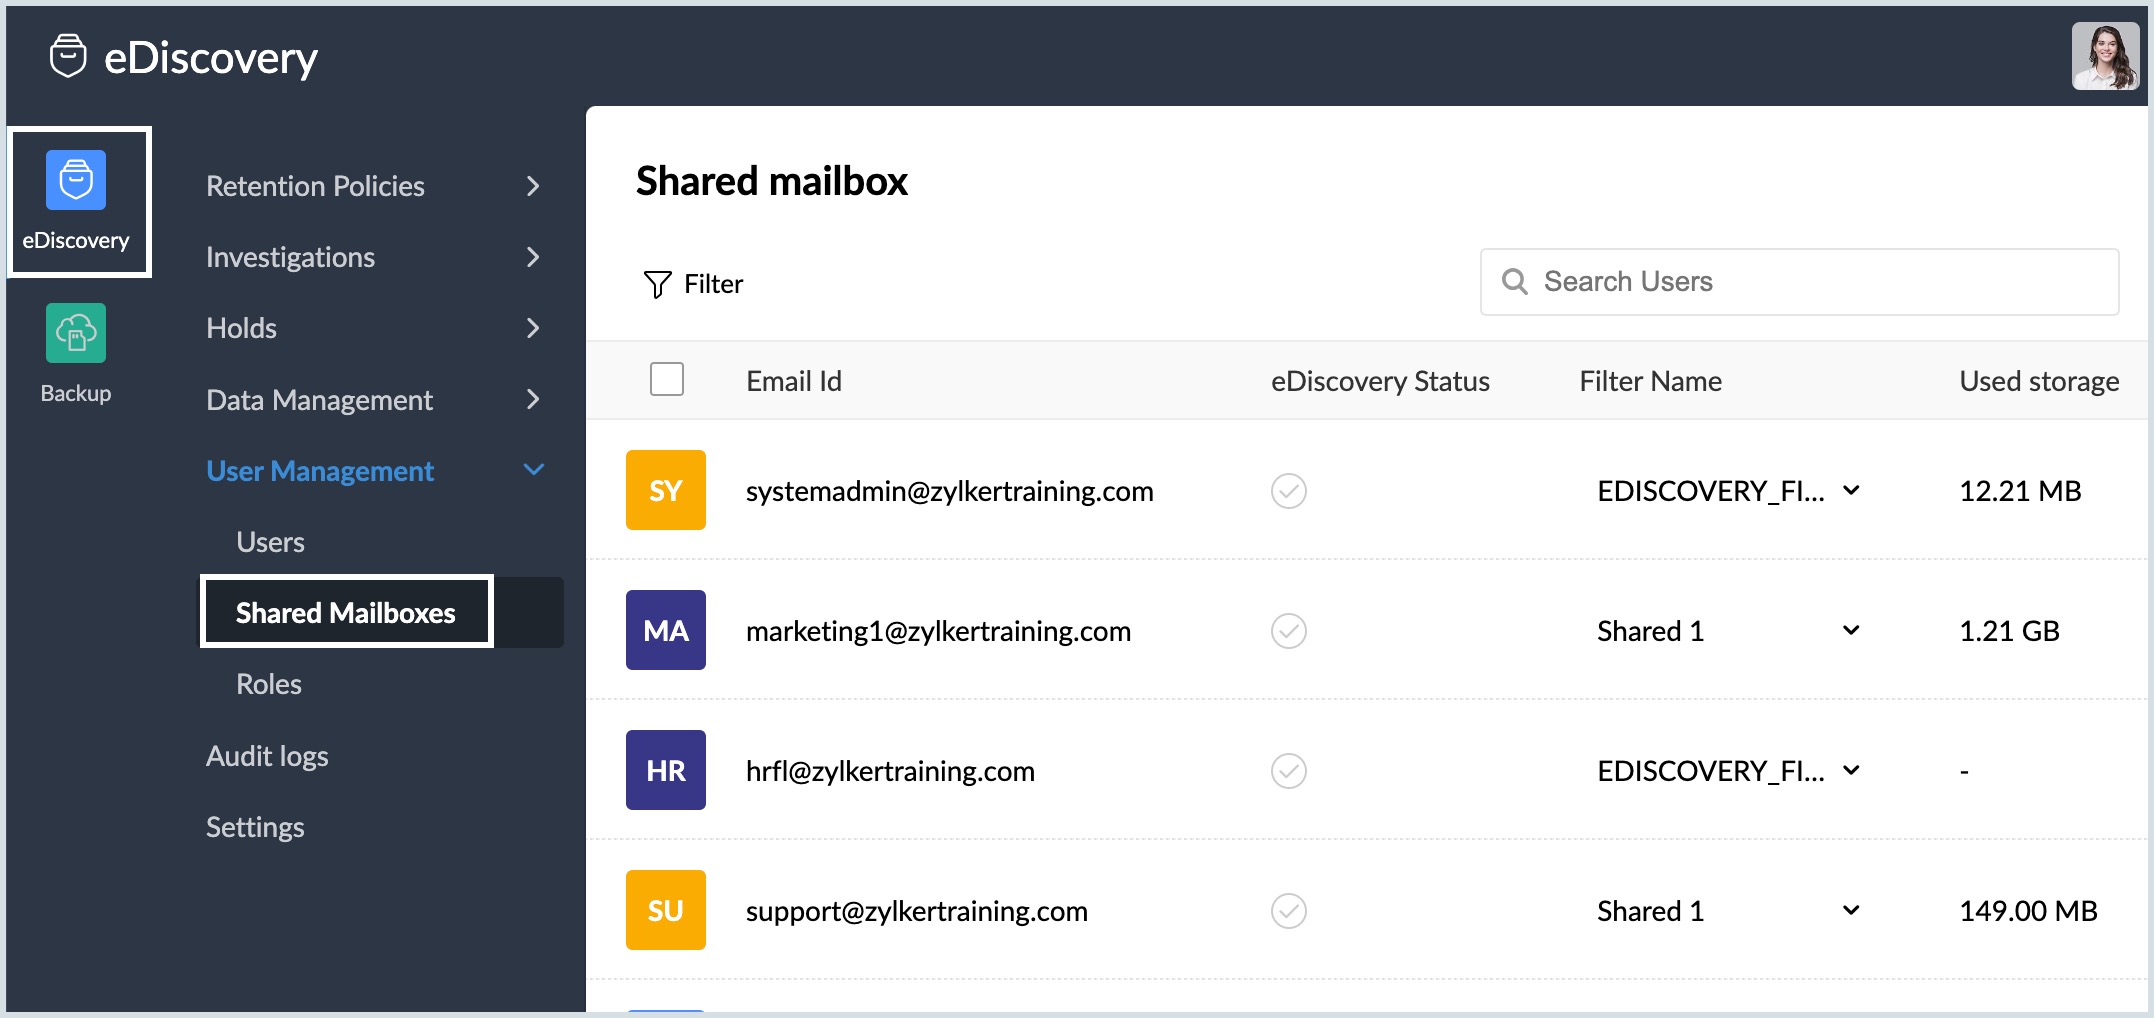 eDiscovery Shared Mailboxes